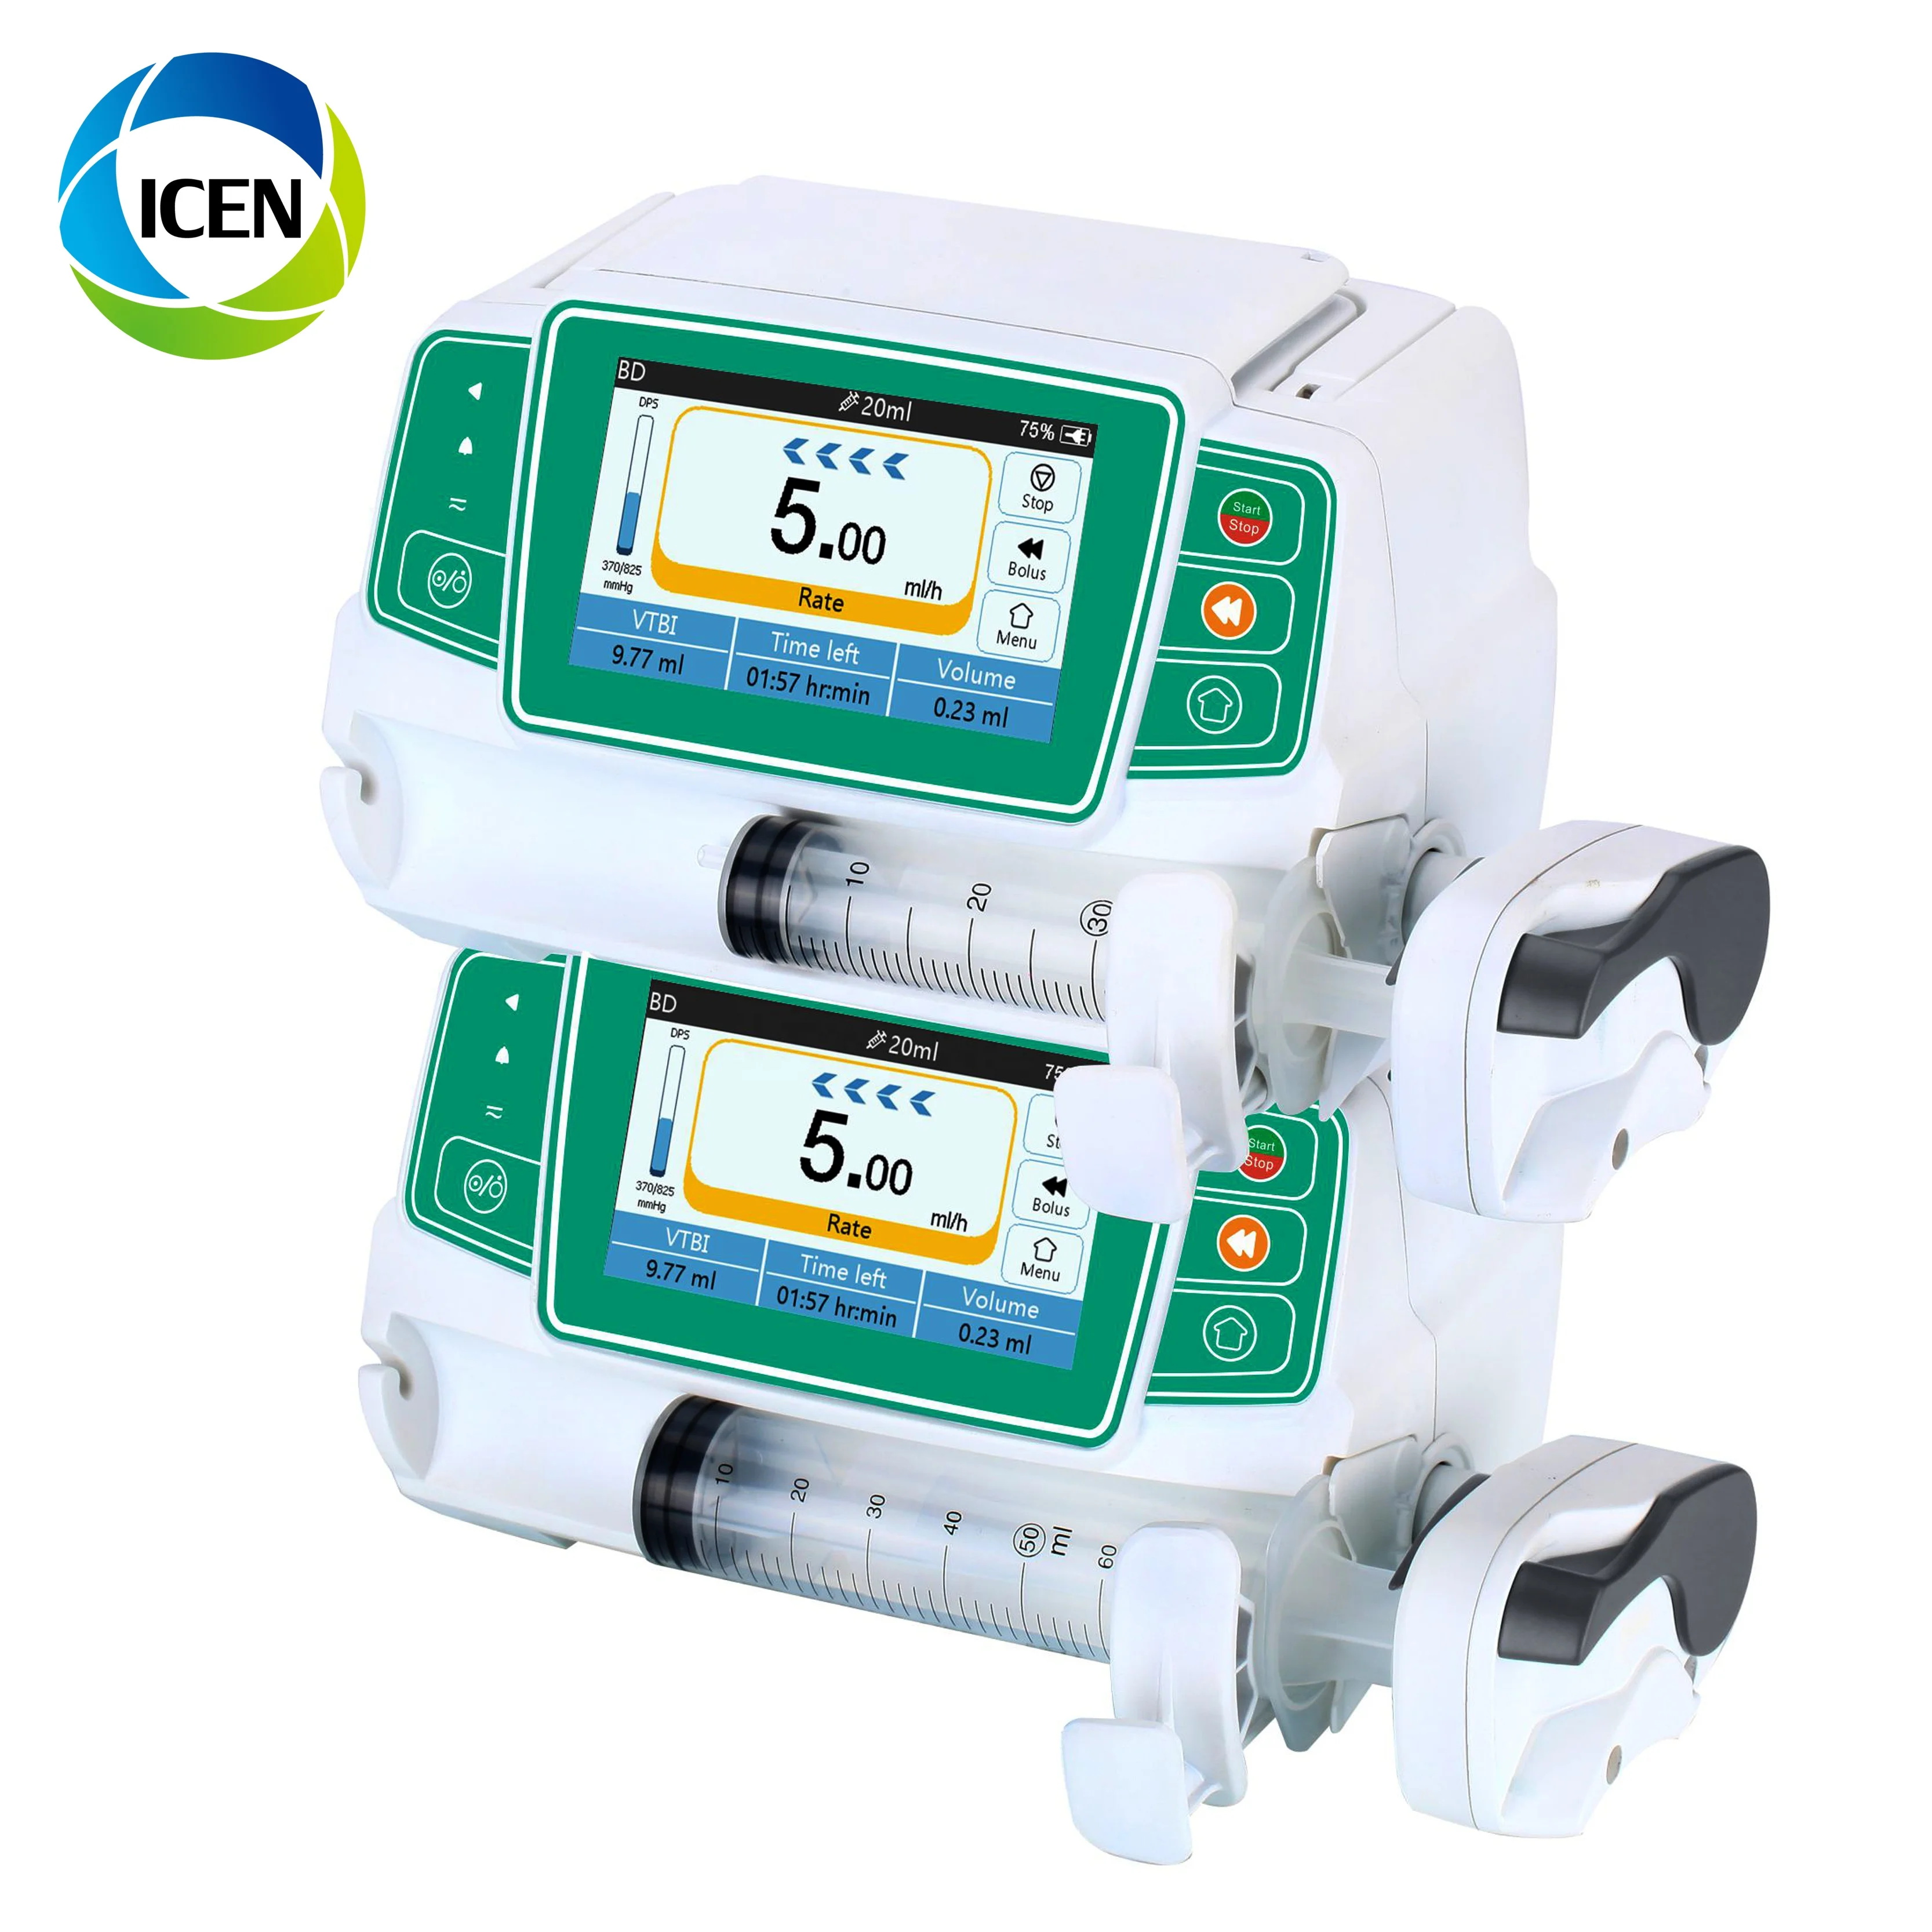 
IN-GS50 hospital medical equipment syringe infusion pump 